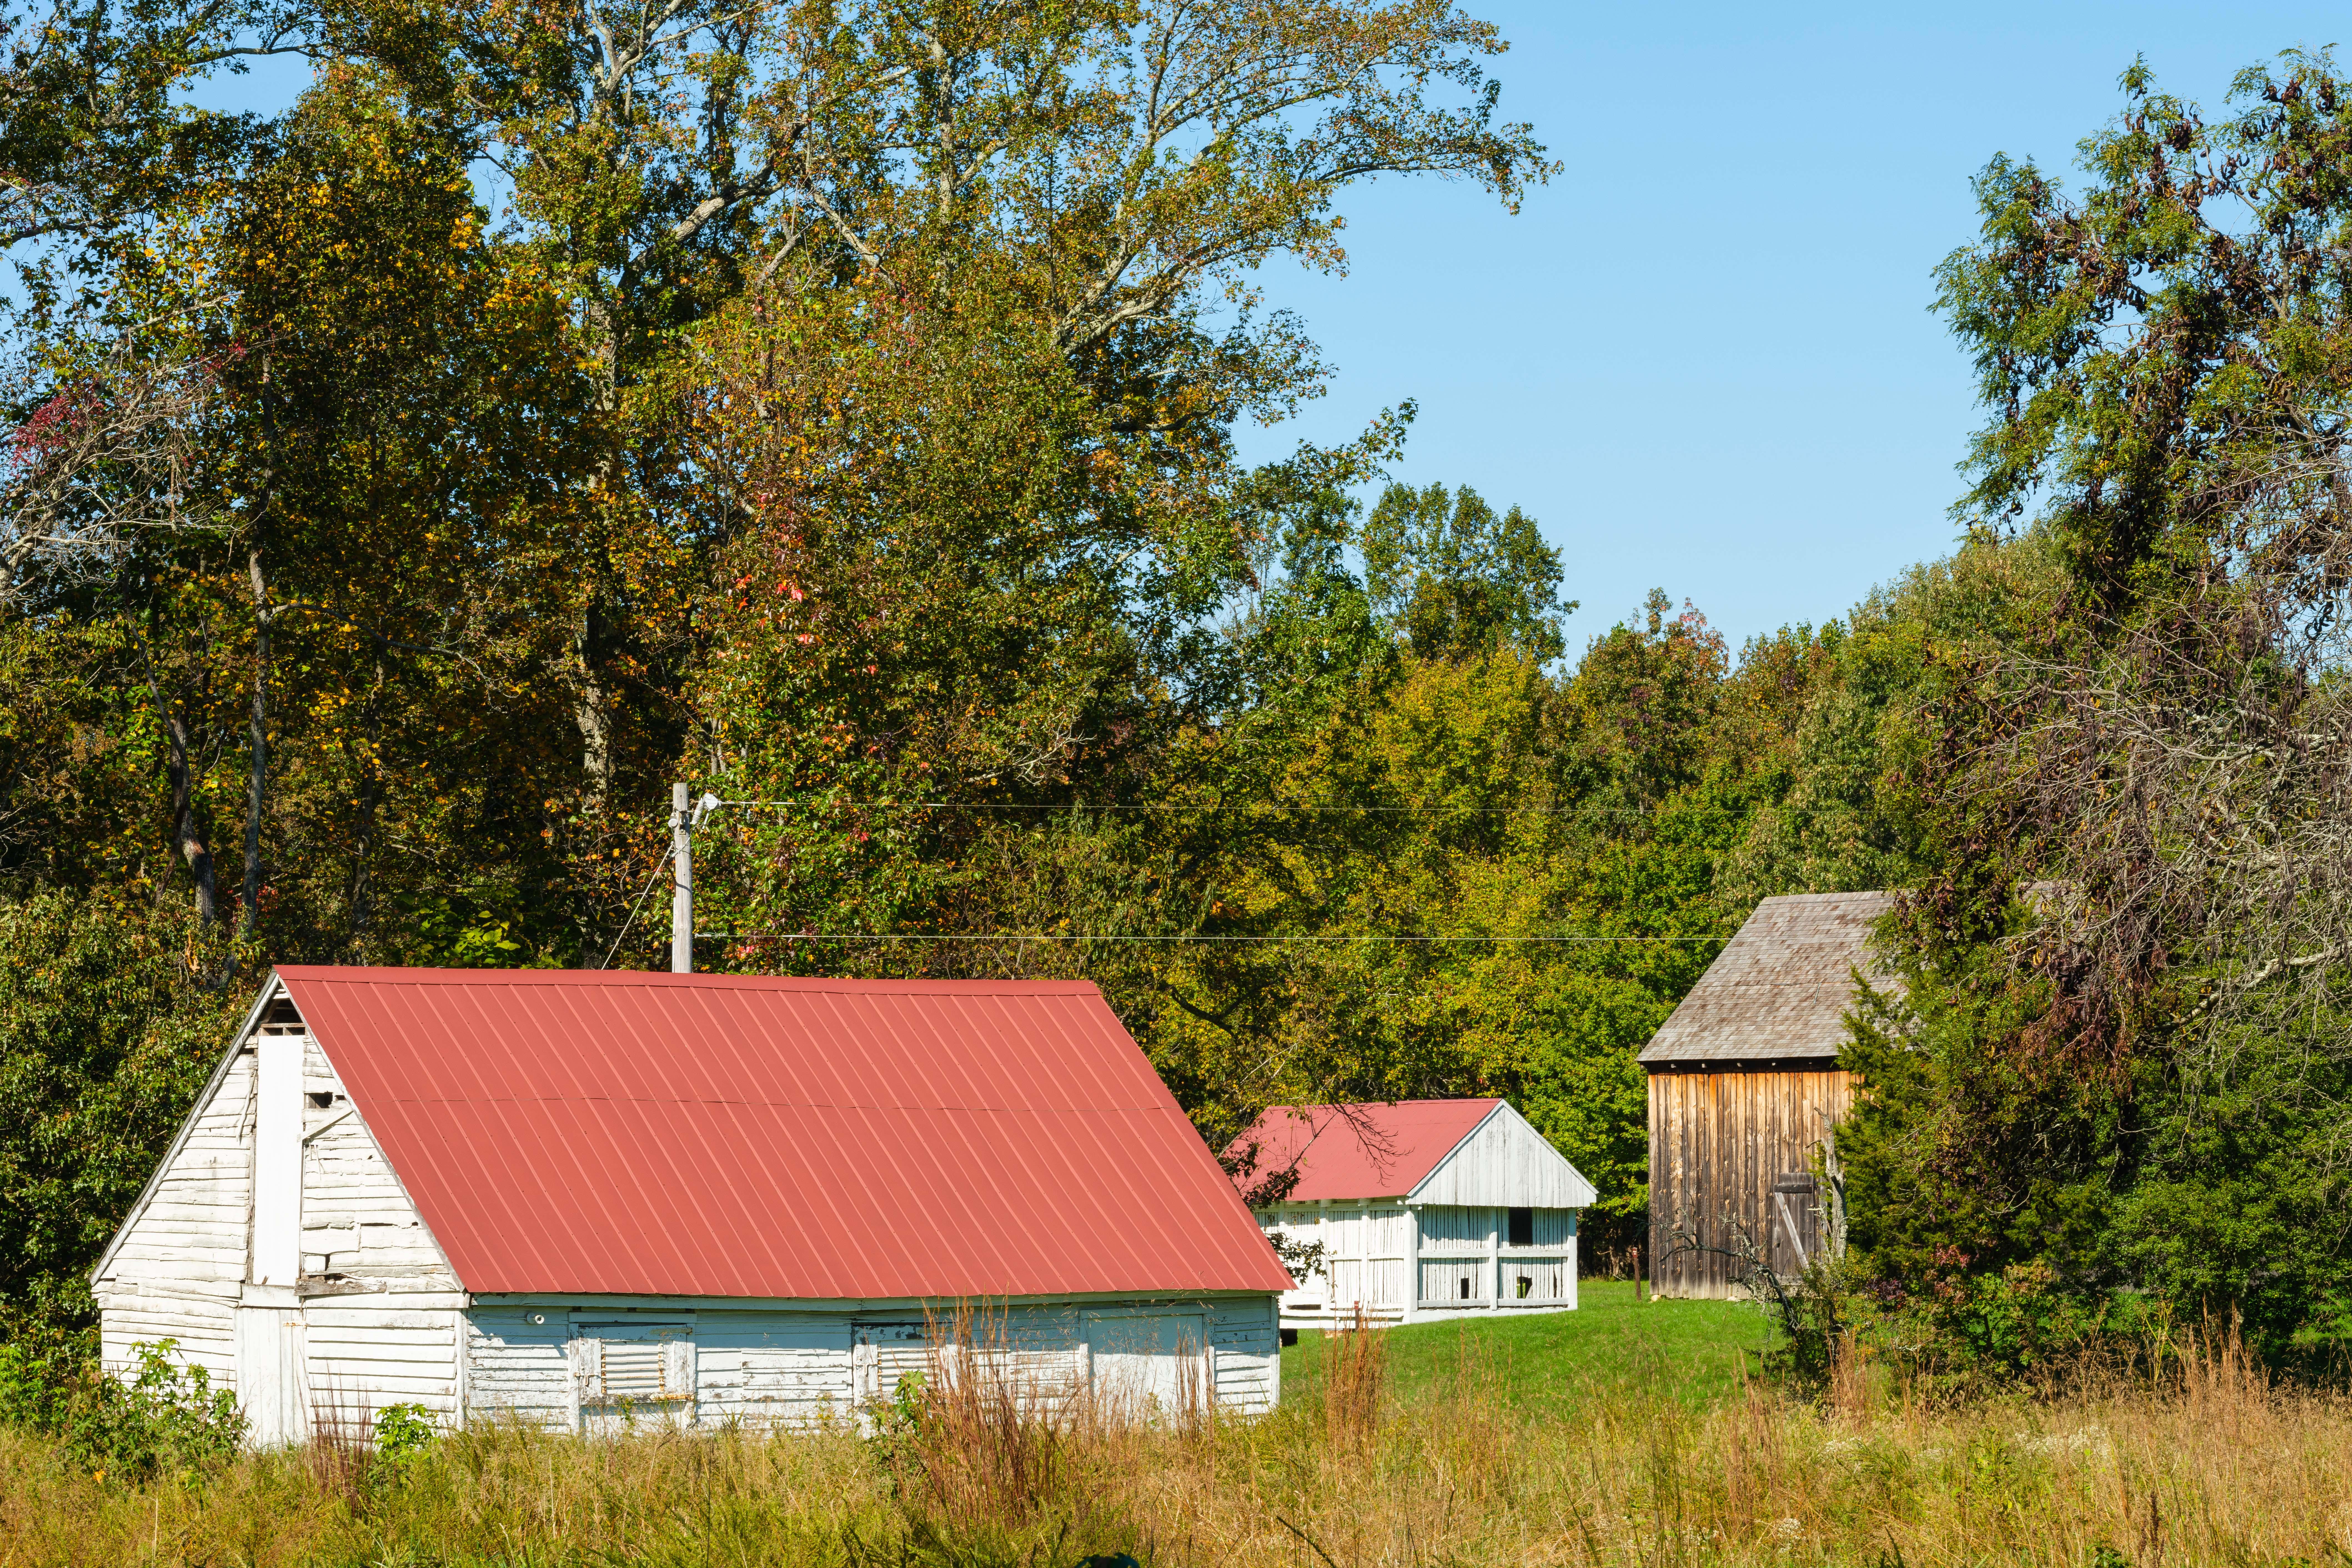 Roof of horse barn with tobacco barn and corn crib in background